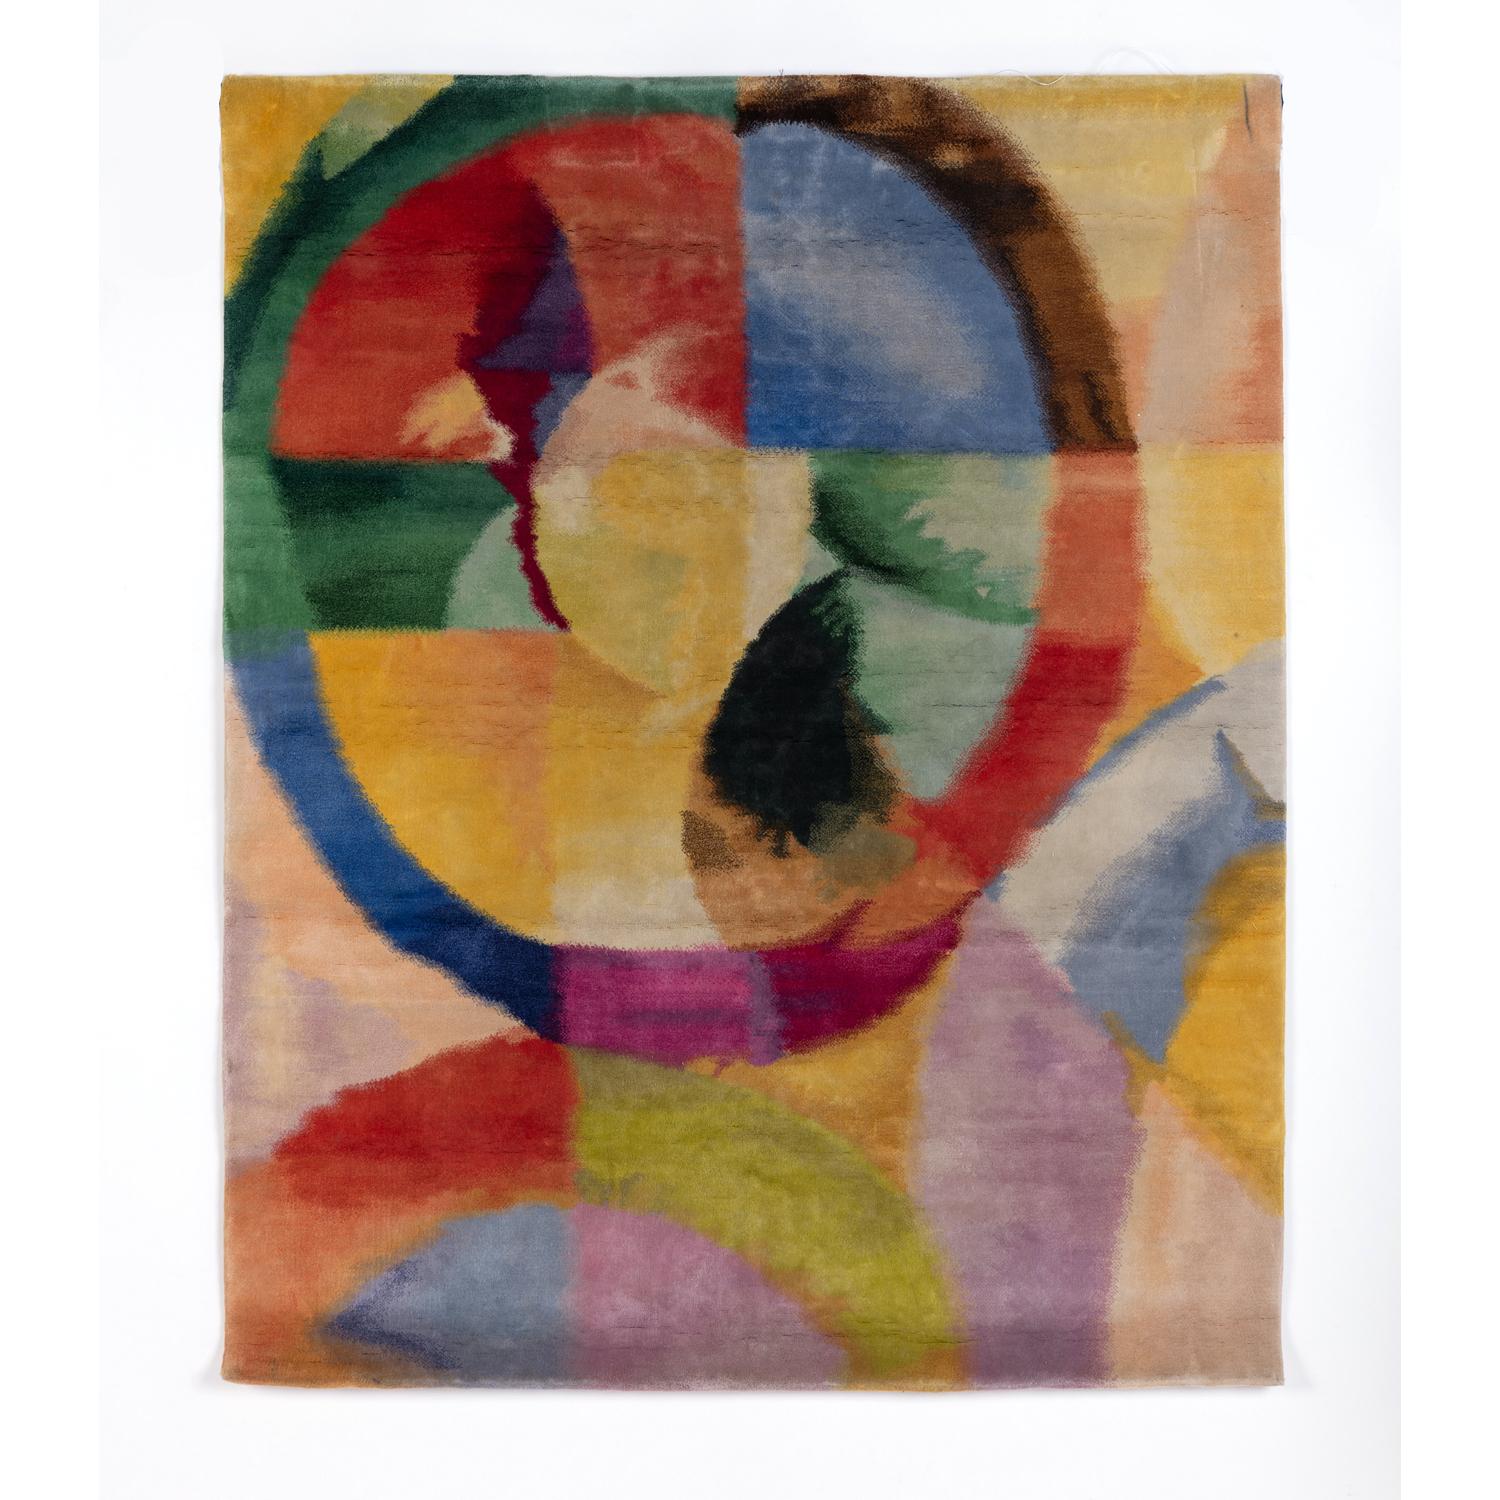 Soleil n.1. by Robert Delaunay, 1980 ca, Silk wool Tapestry woven on Canvas 3